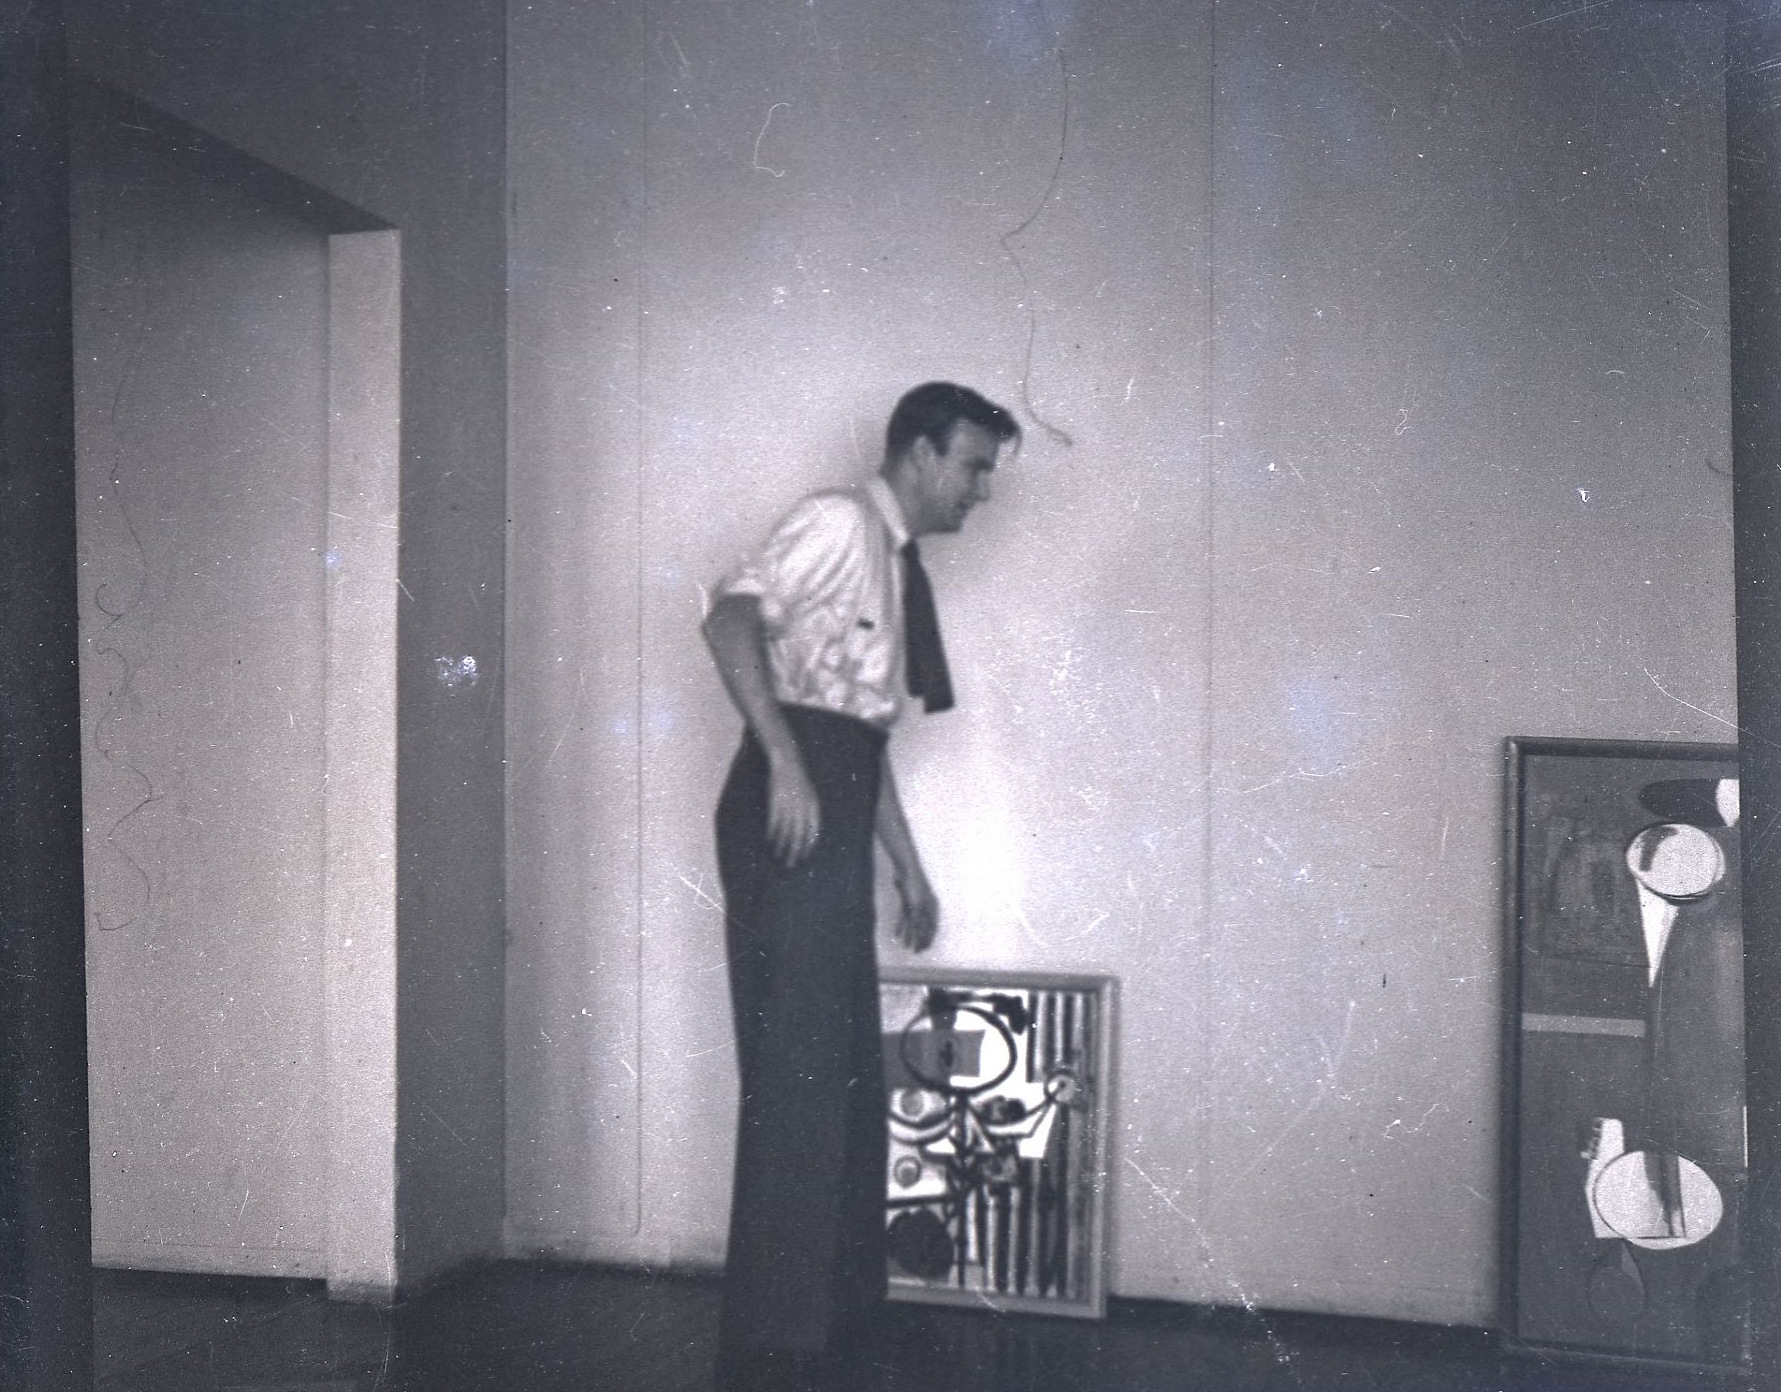 Motherwell installing his exhibition at Art of This Century, New York, October 1944